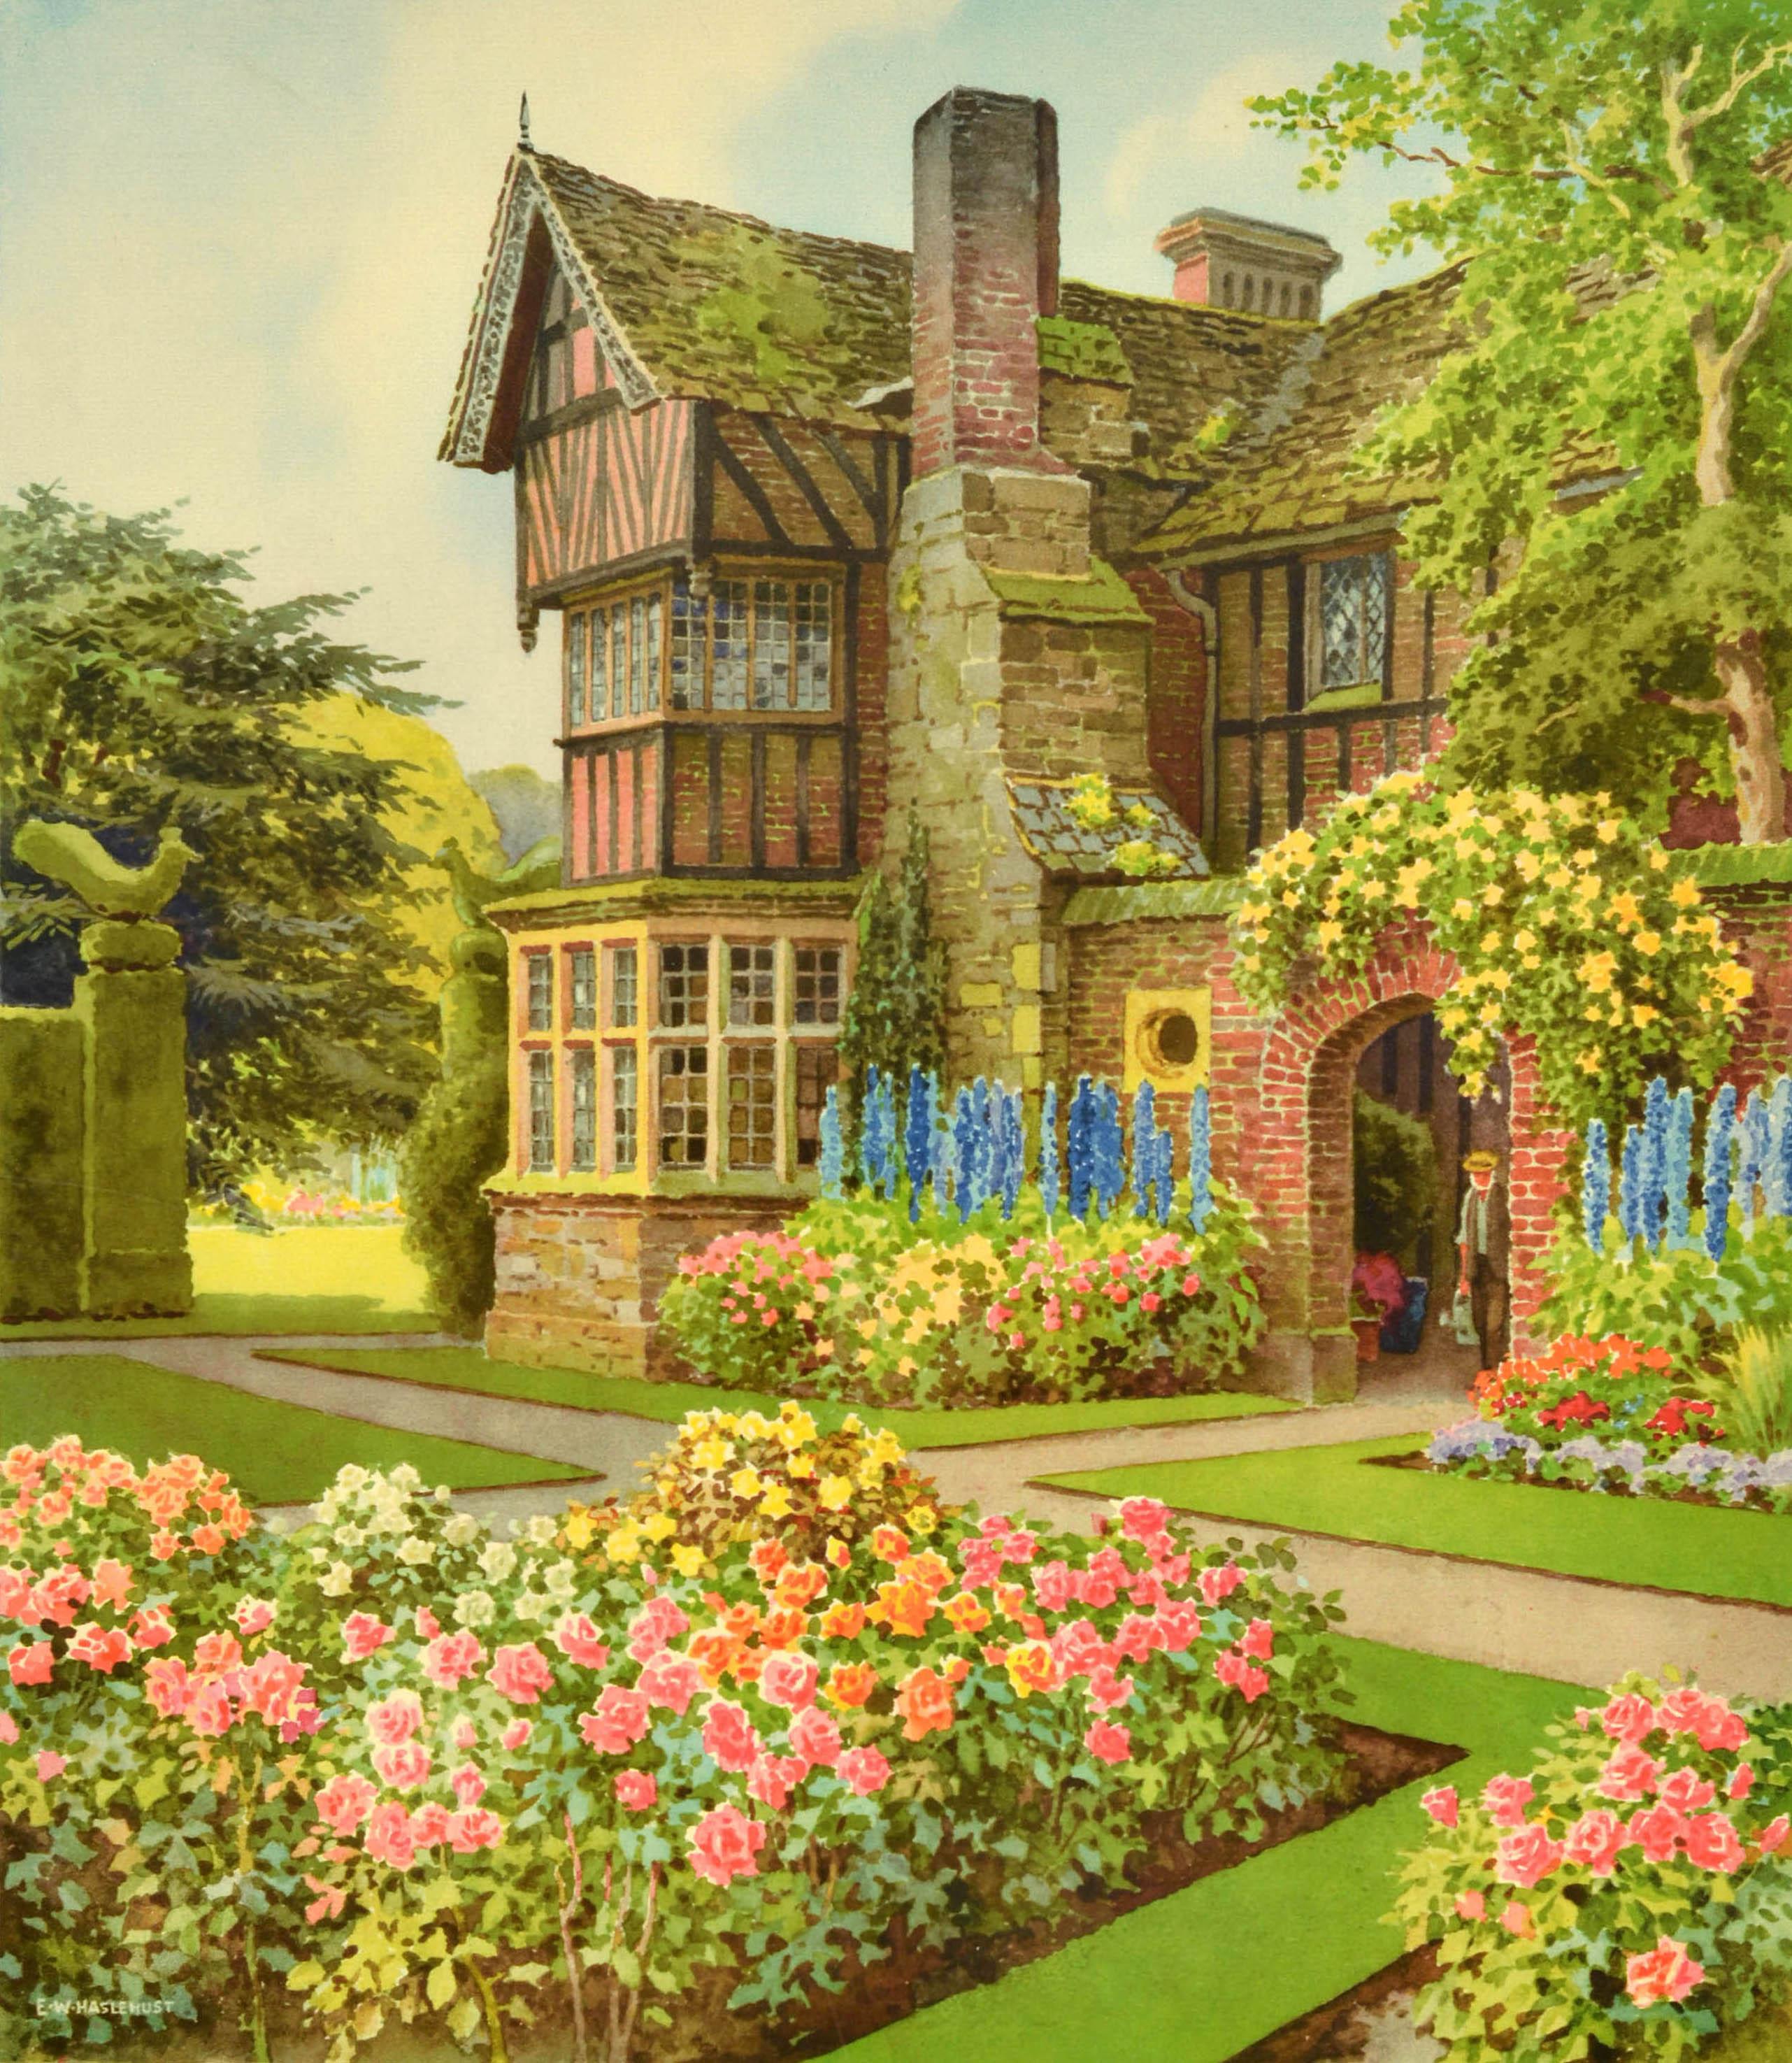 Original vintage travel poster - Britain in Summer - featuring a great image by the watercolour painter Ernest William Haslehust (1866-1949) of a traditional English country manor house with colourful flower beds in a neatly landscaped garden with